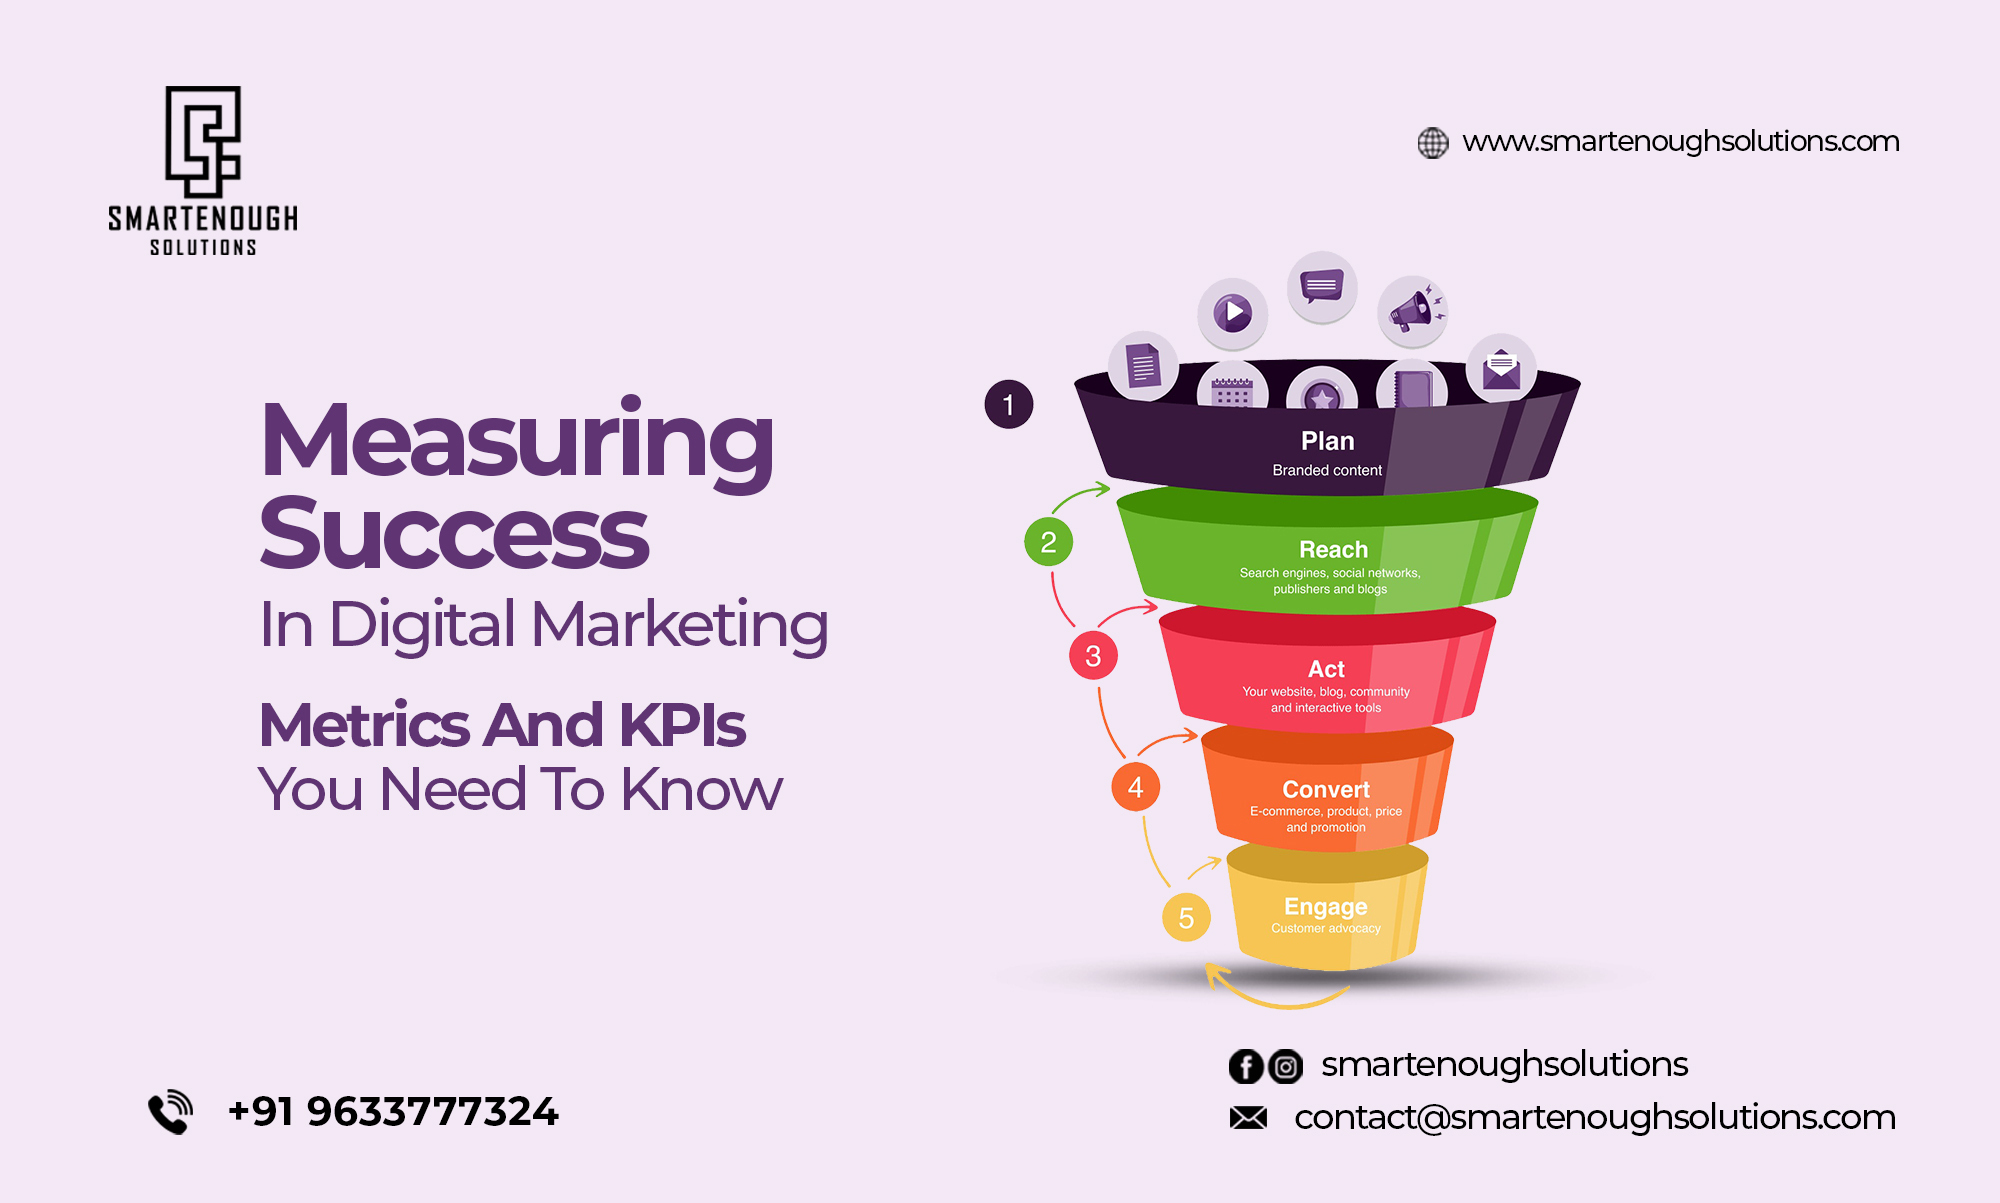 Measuring Success in Digital Marketing: Metrics and KPIs You Need to Know